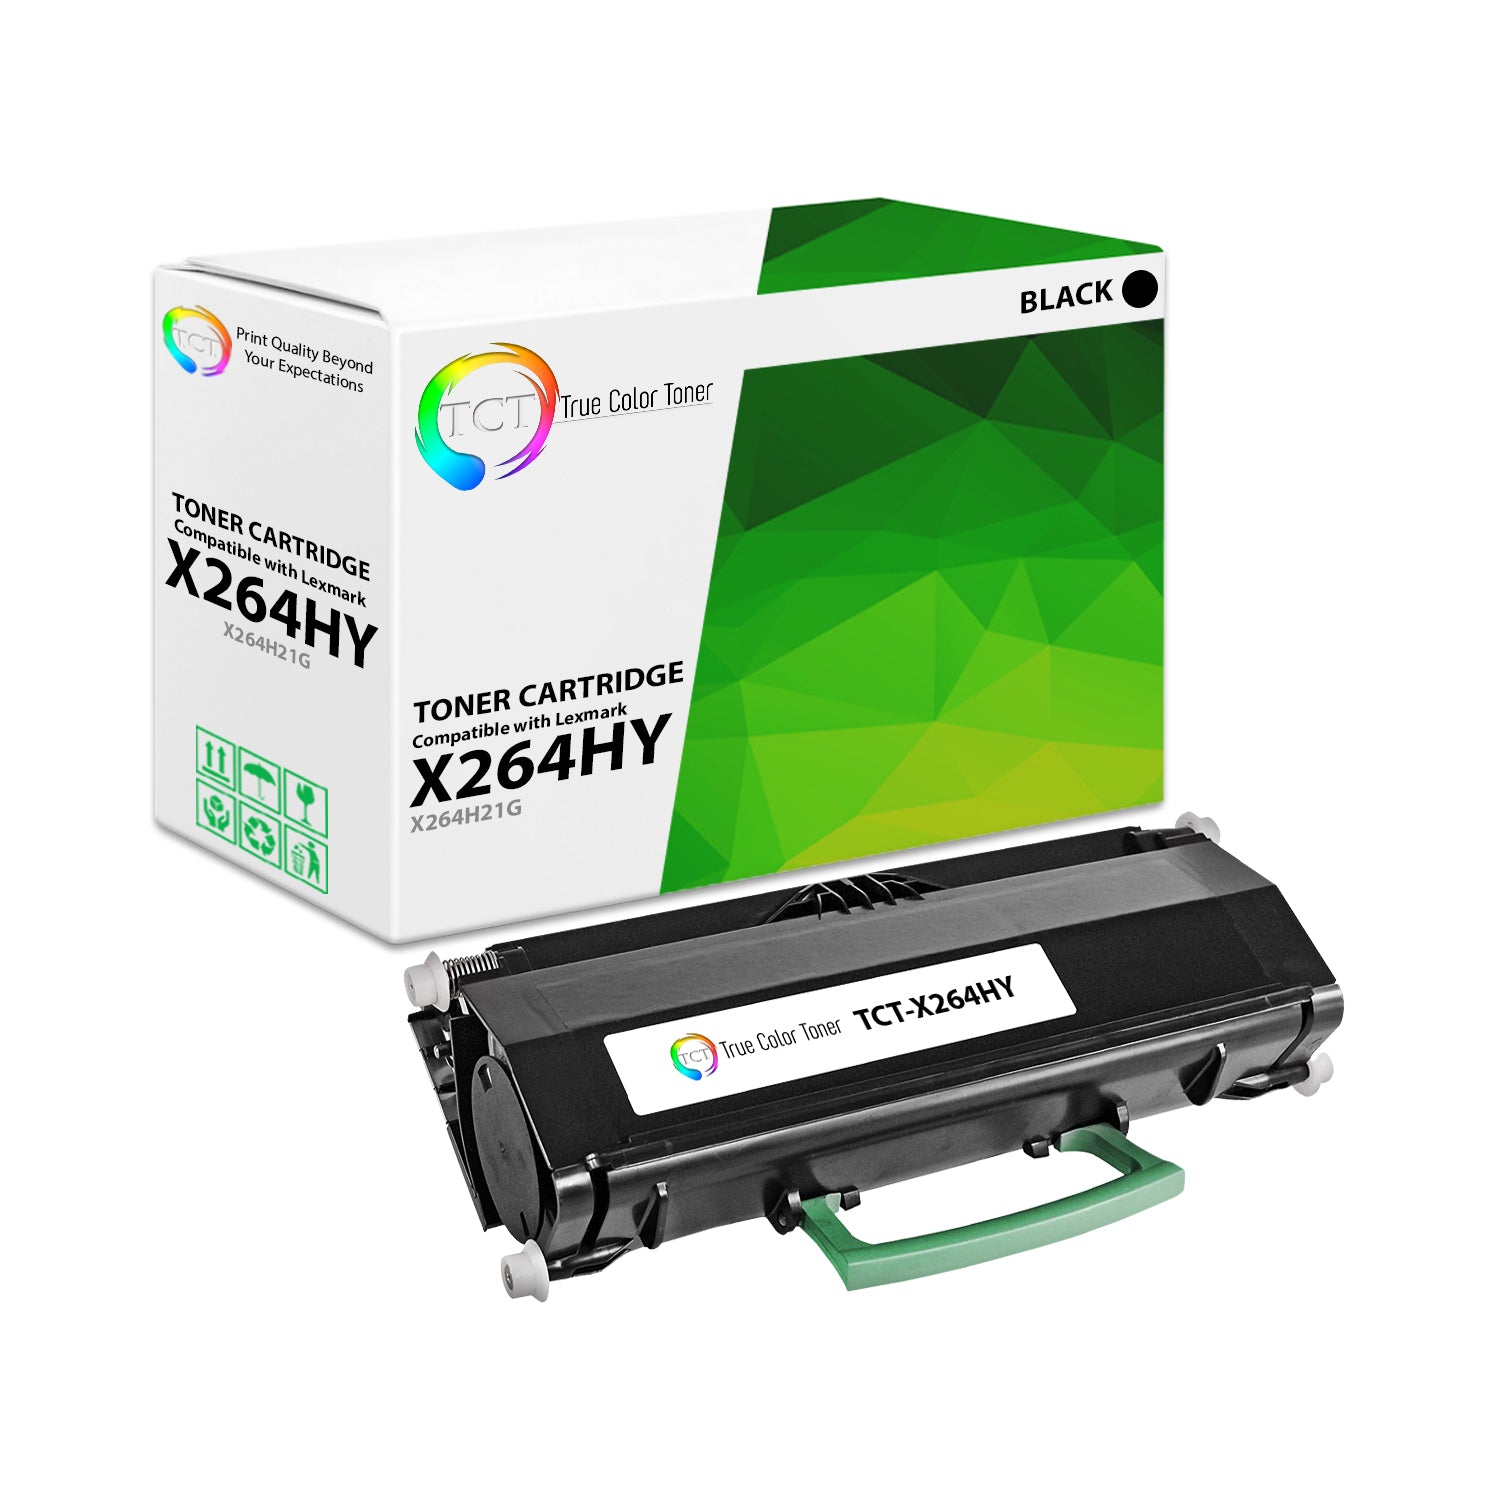 TCT Remanufactured High Yield Toner Cartridge Replacement for the Lexmark X264 Series - 1 Pack Black